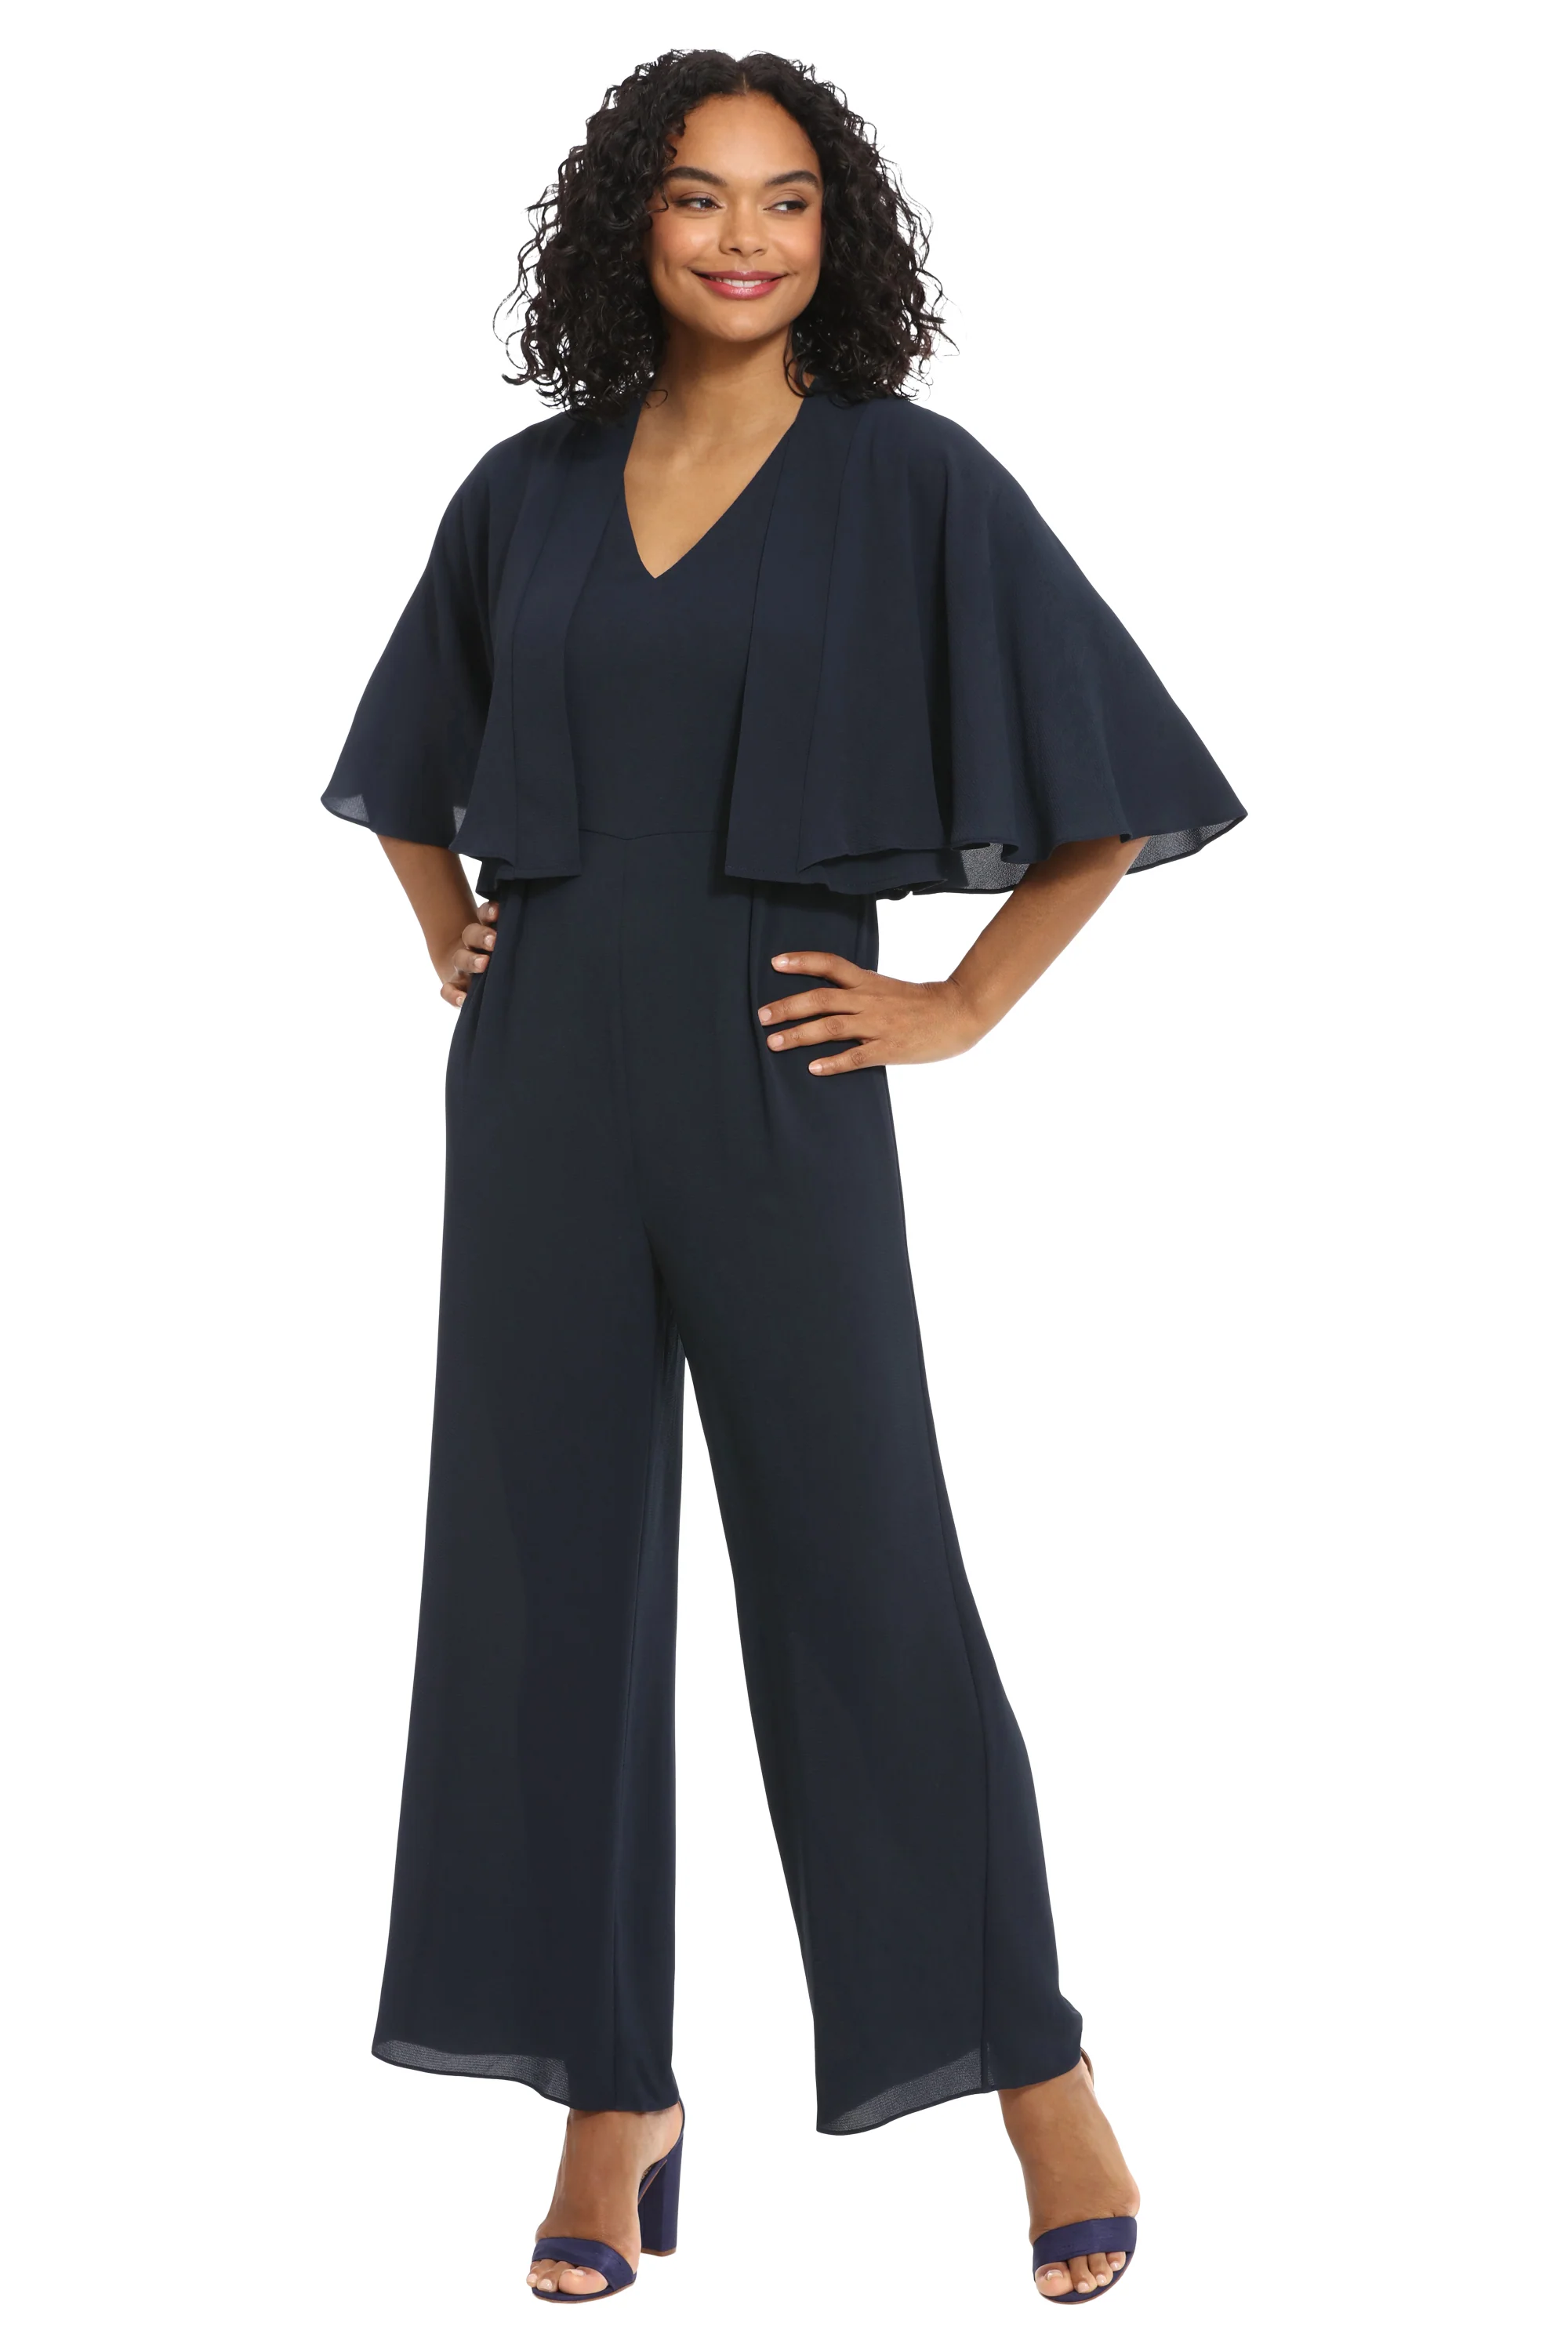 V-NECK CATALINA JUMPSUIT WITH CAPELET